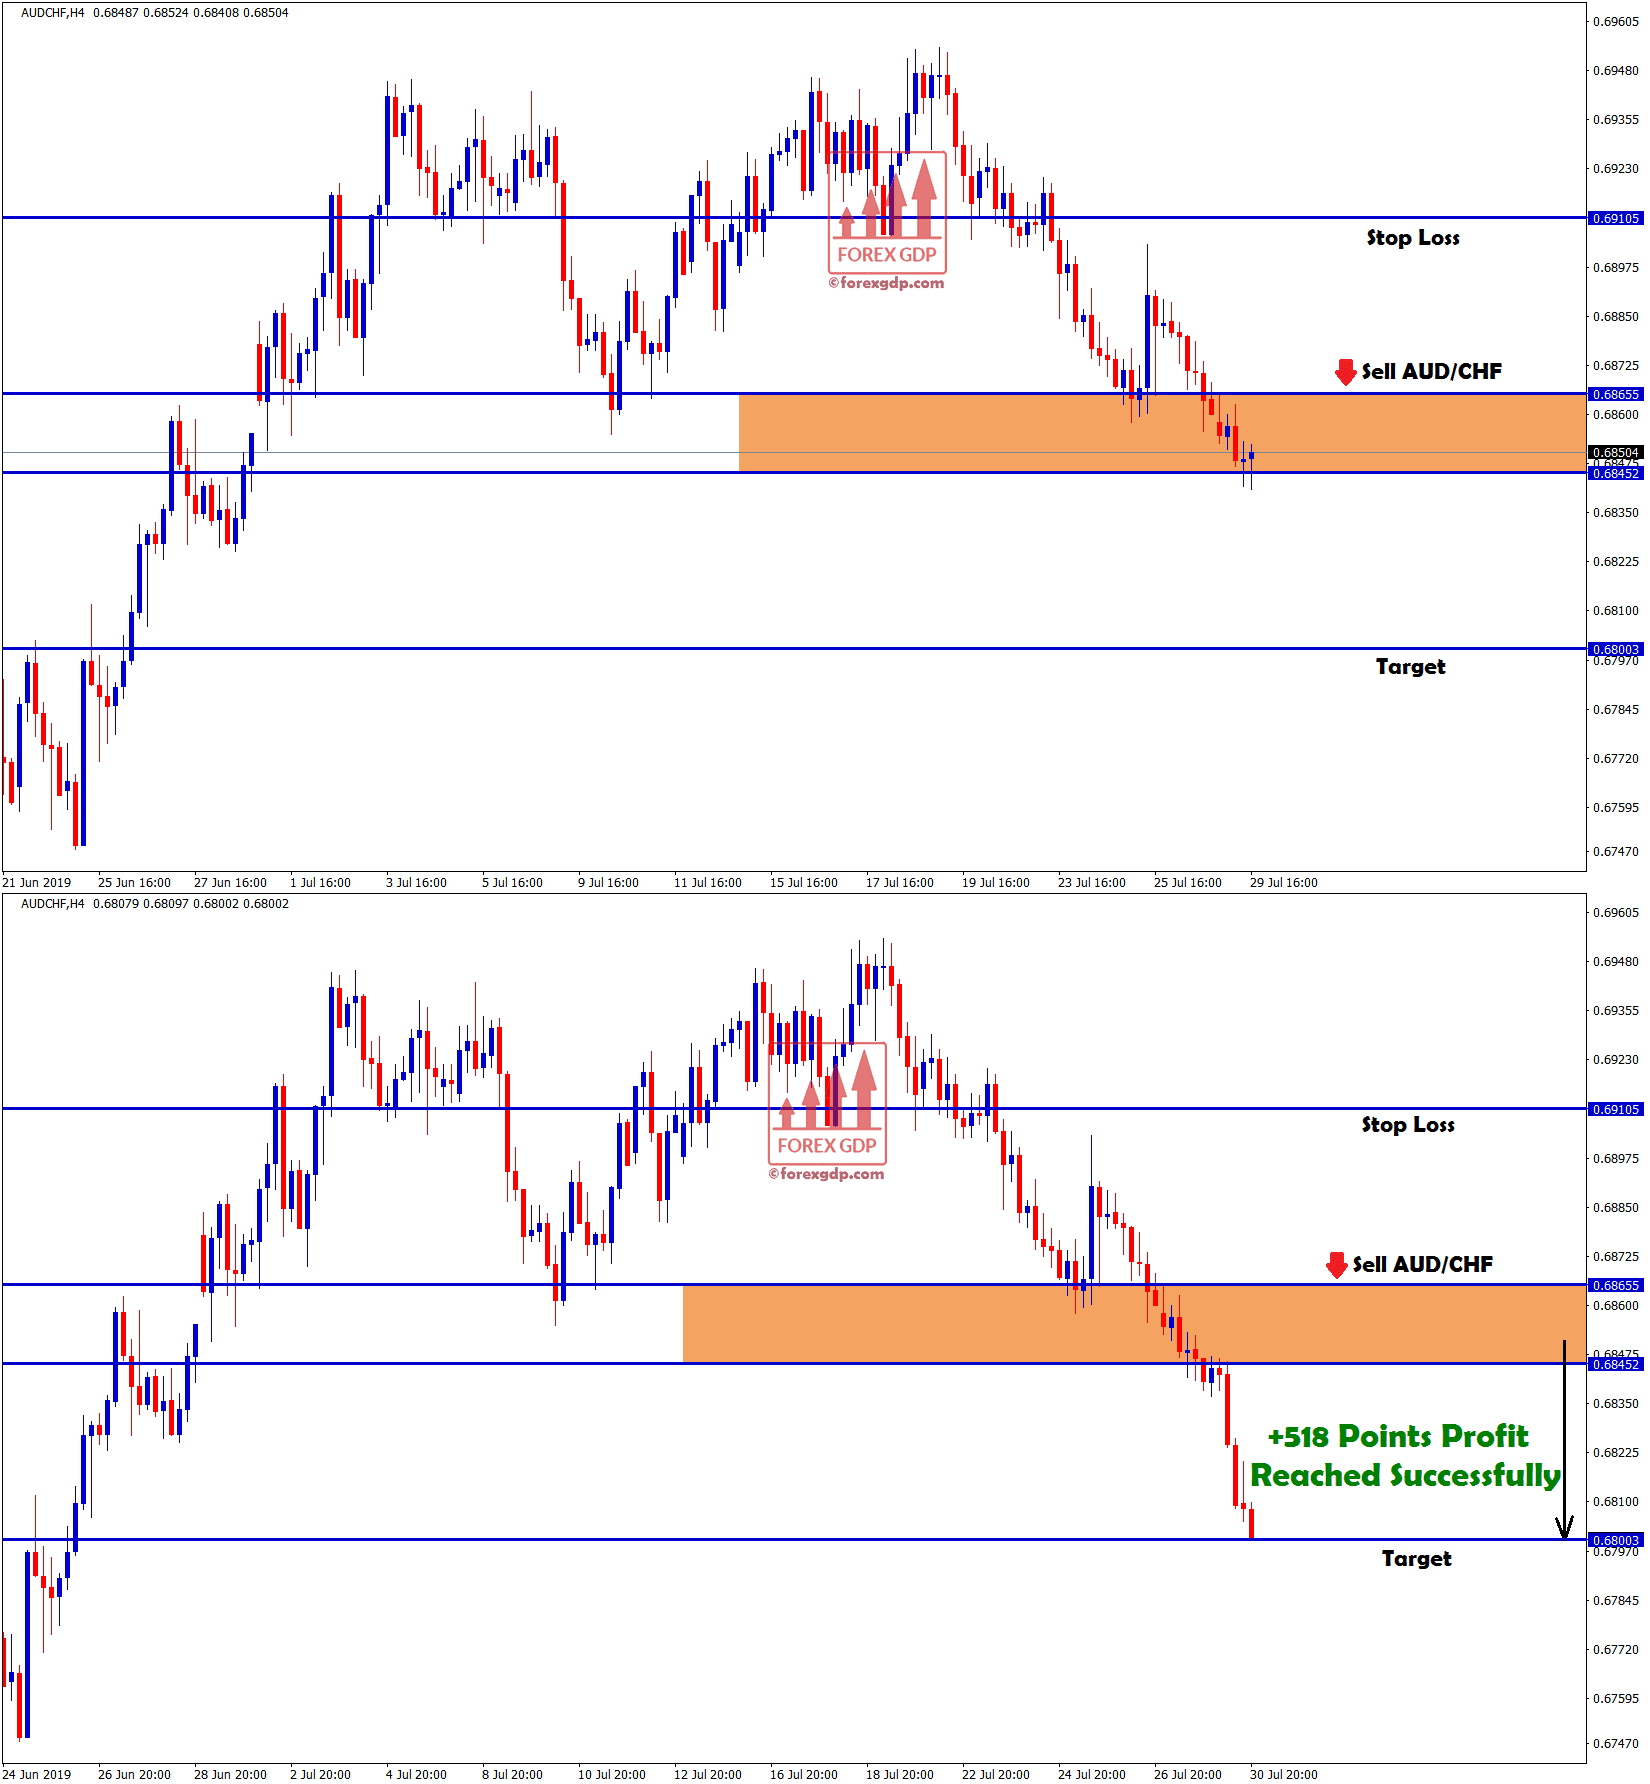 AUD/CHF hits+518 points in sell trade